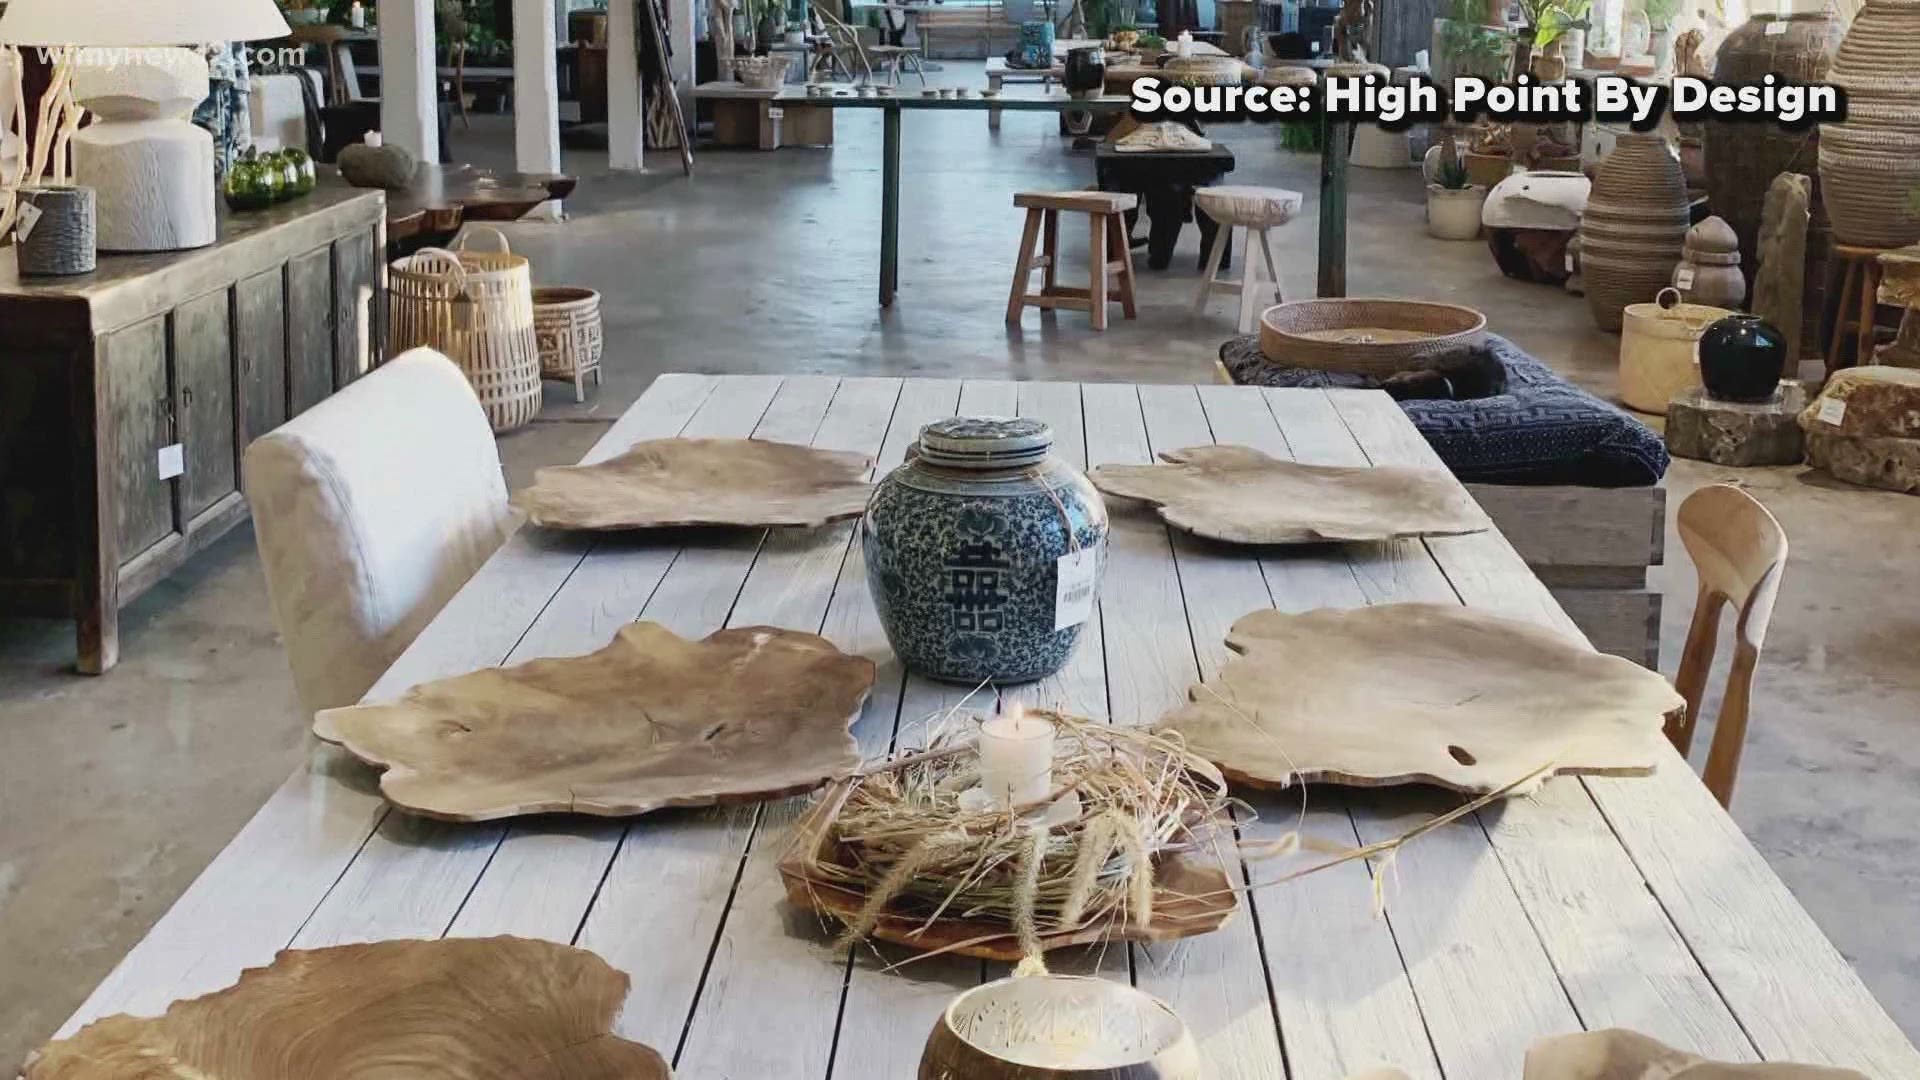 Sixteen companies in High Point are joining forces to open their doors and bring furnishings of the Furniture Market to customers year round.